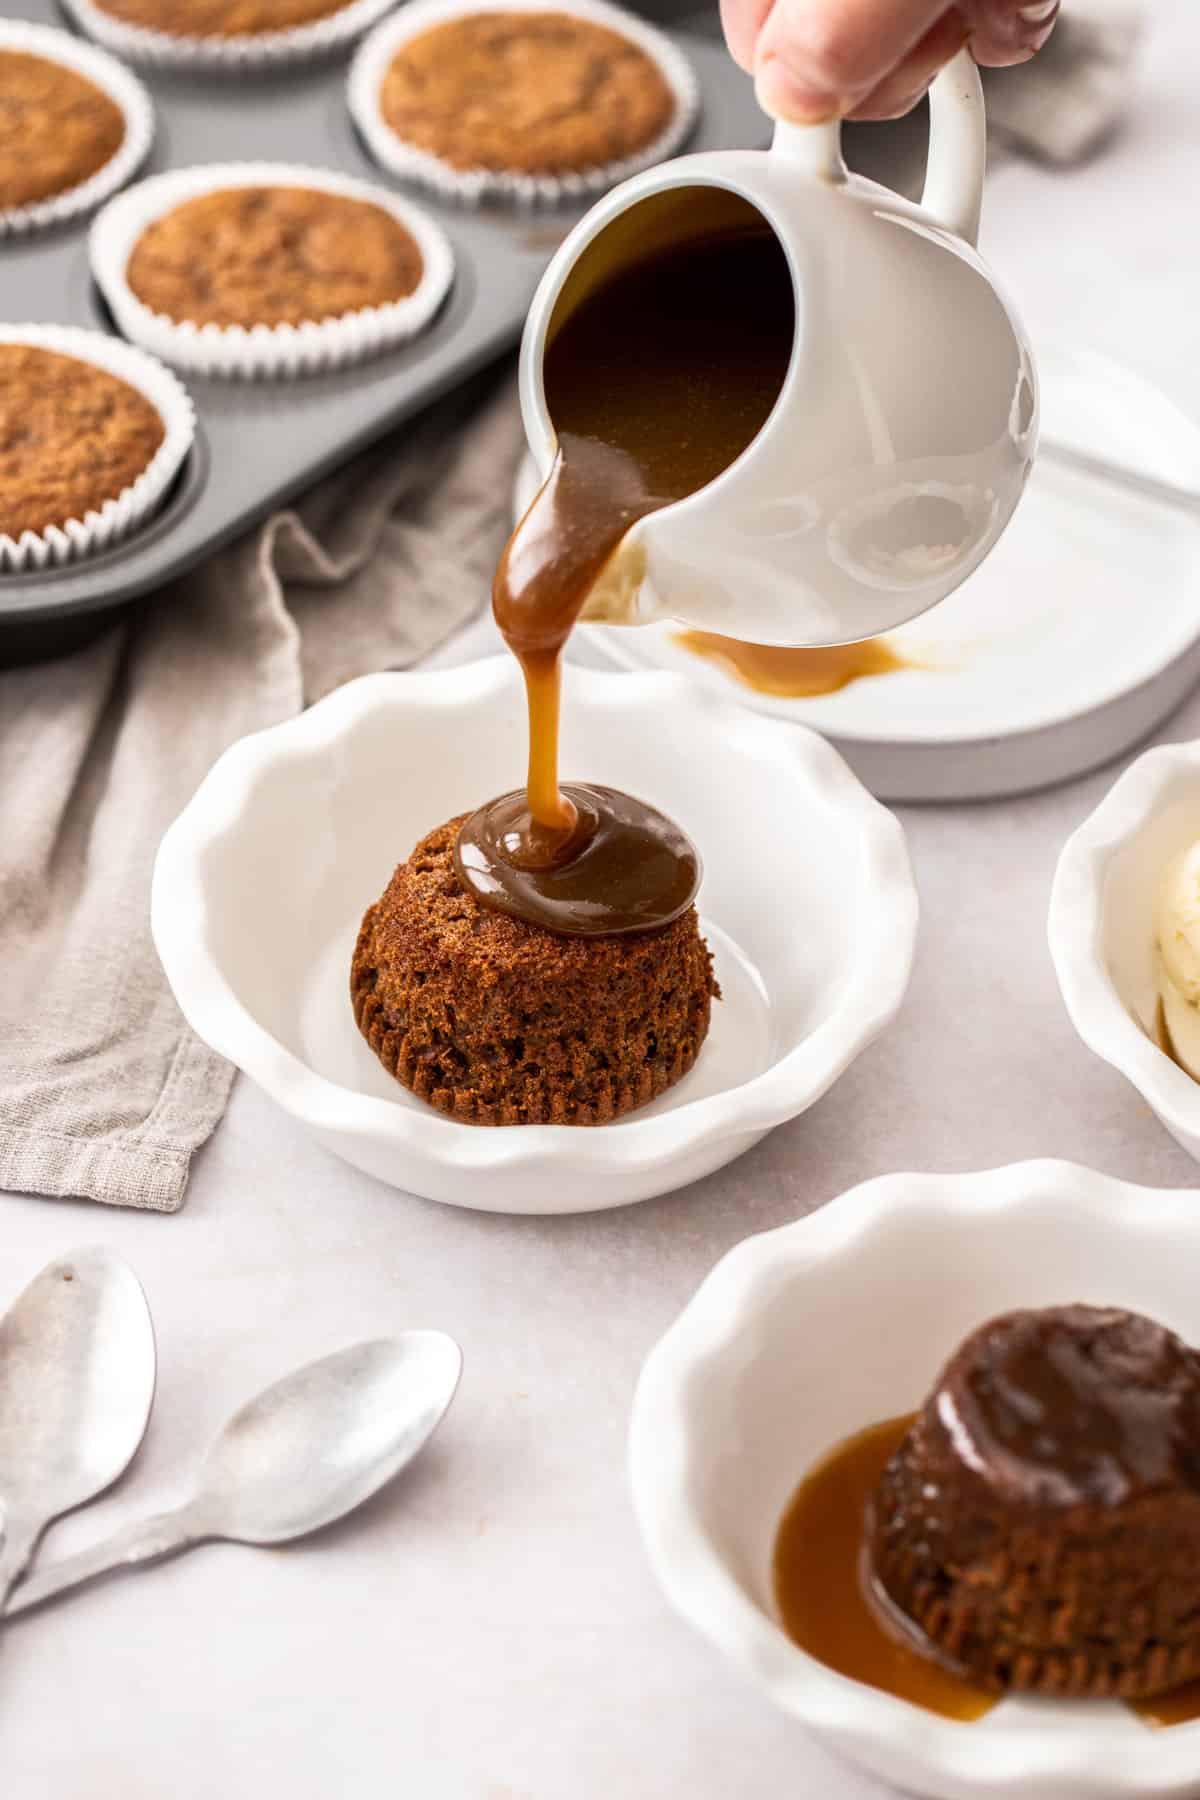 A pudding in a small dish, with some toffee sauce being poured over it.